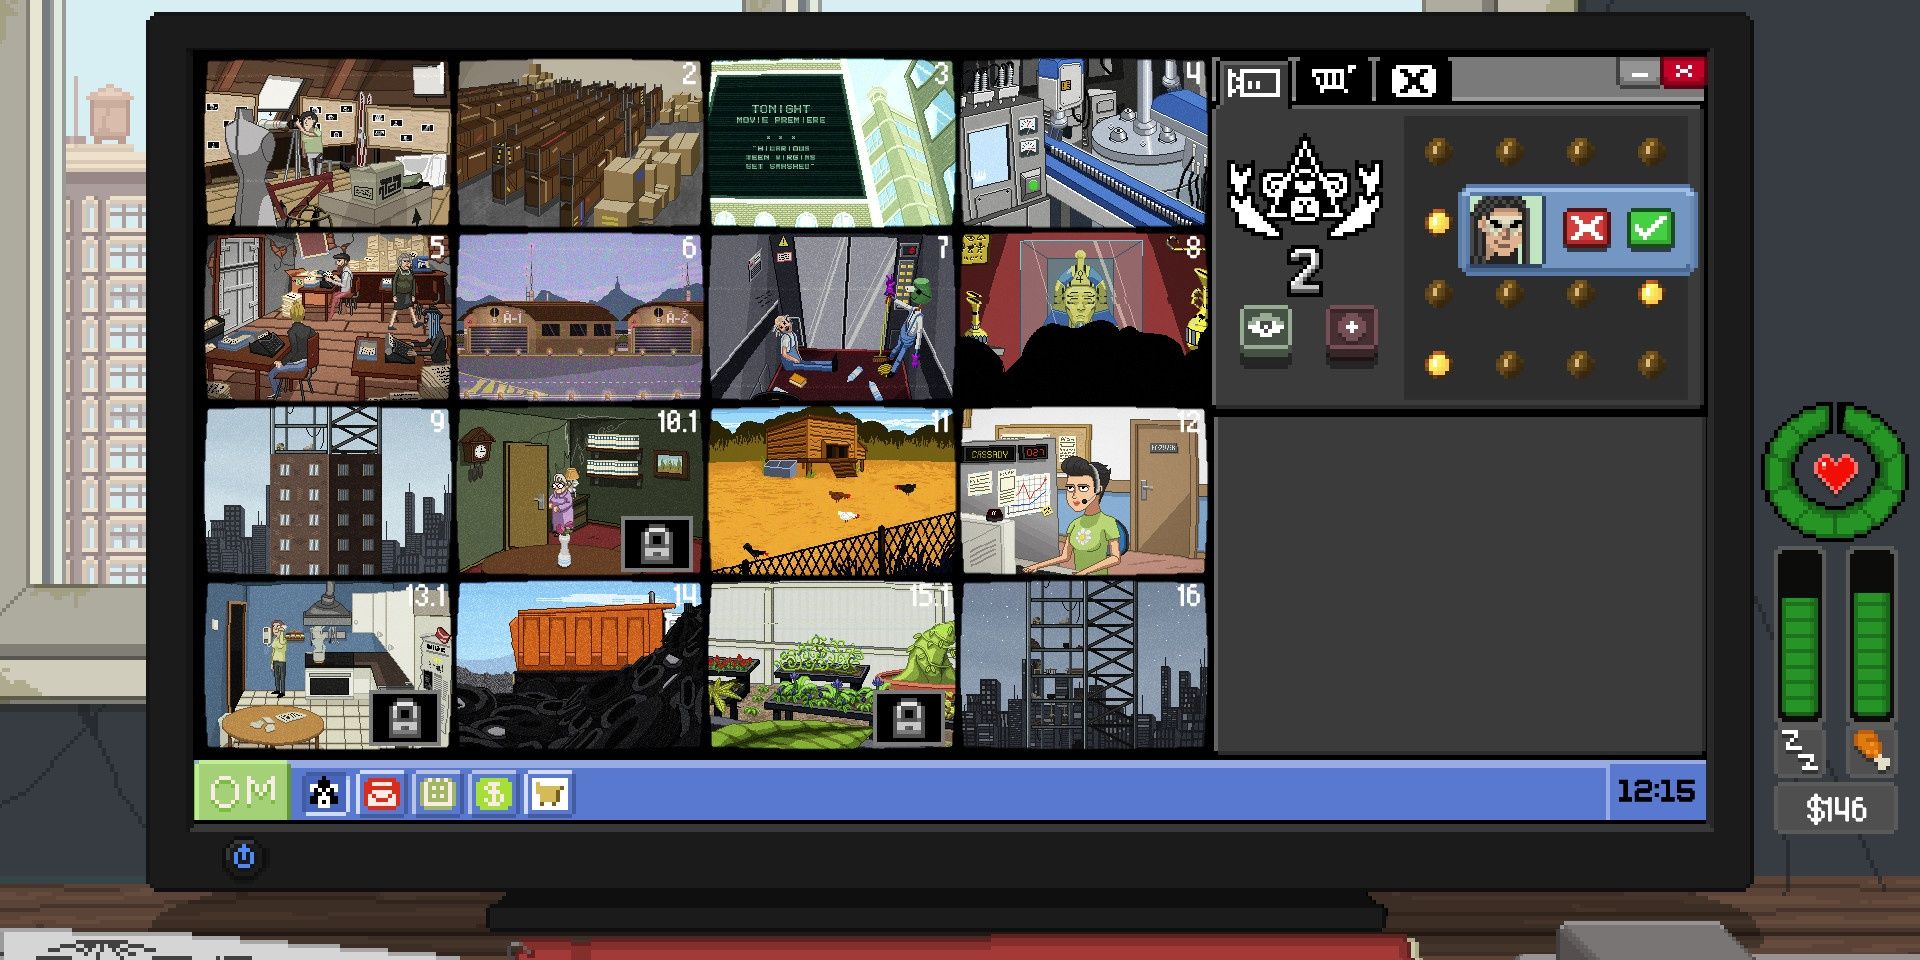 A Do Not Feed The Monkeys screenshot of the security camera grid on the desktop